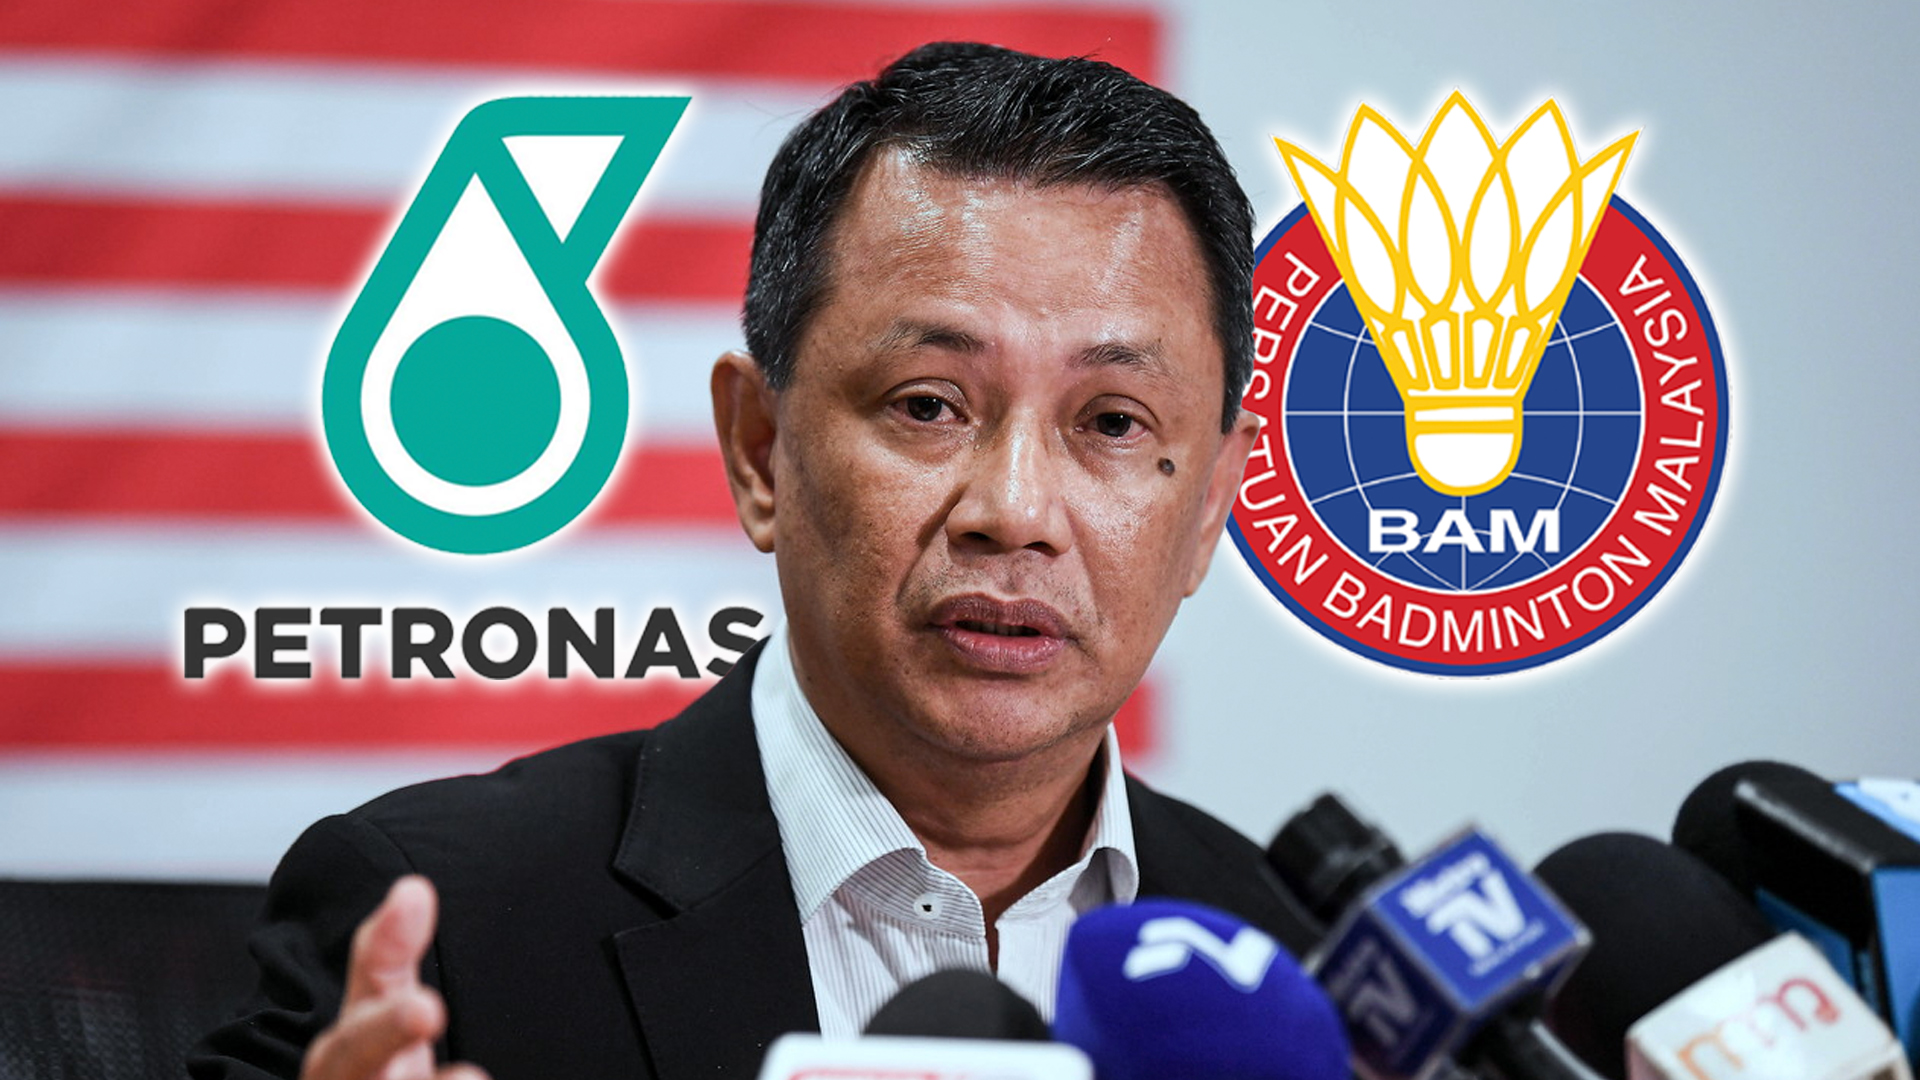 Will Petronas’ sponsorship continue after BAM’s Norza quits post-Paris?